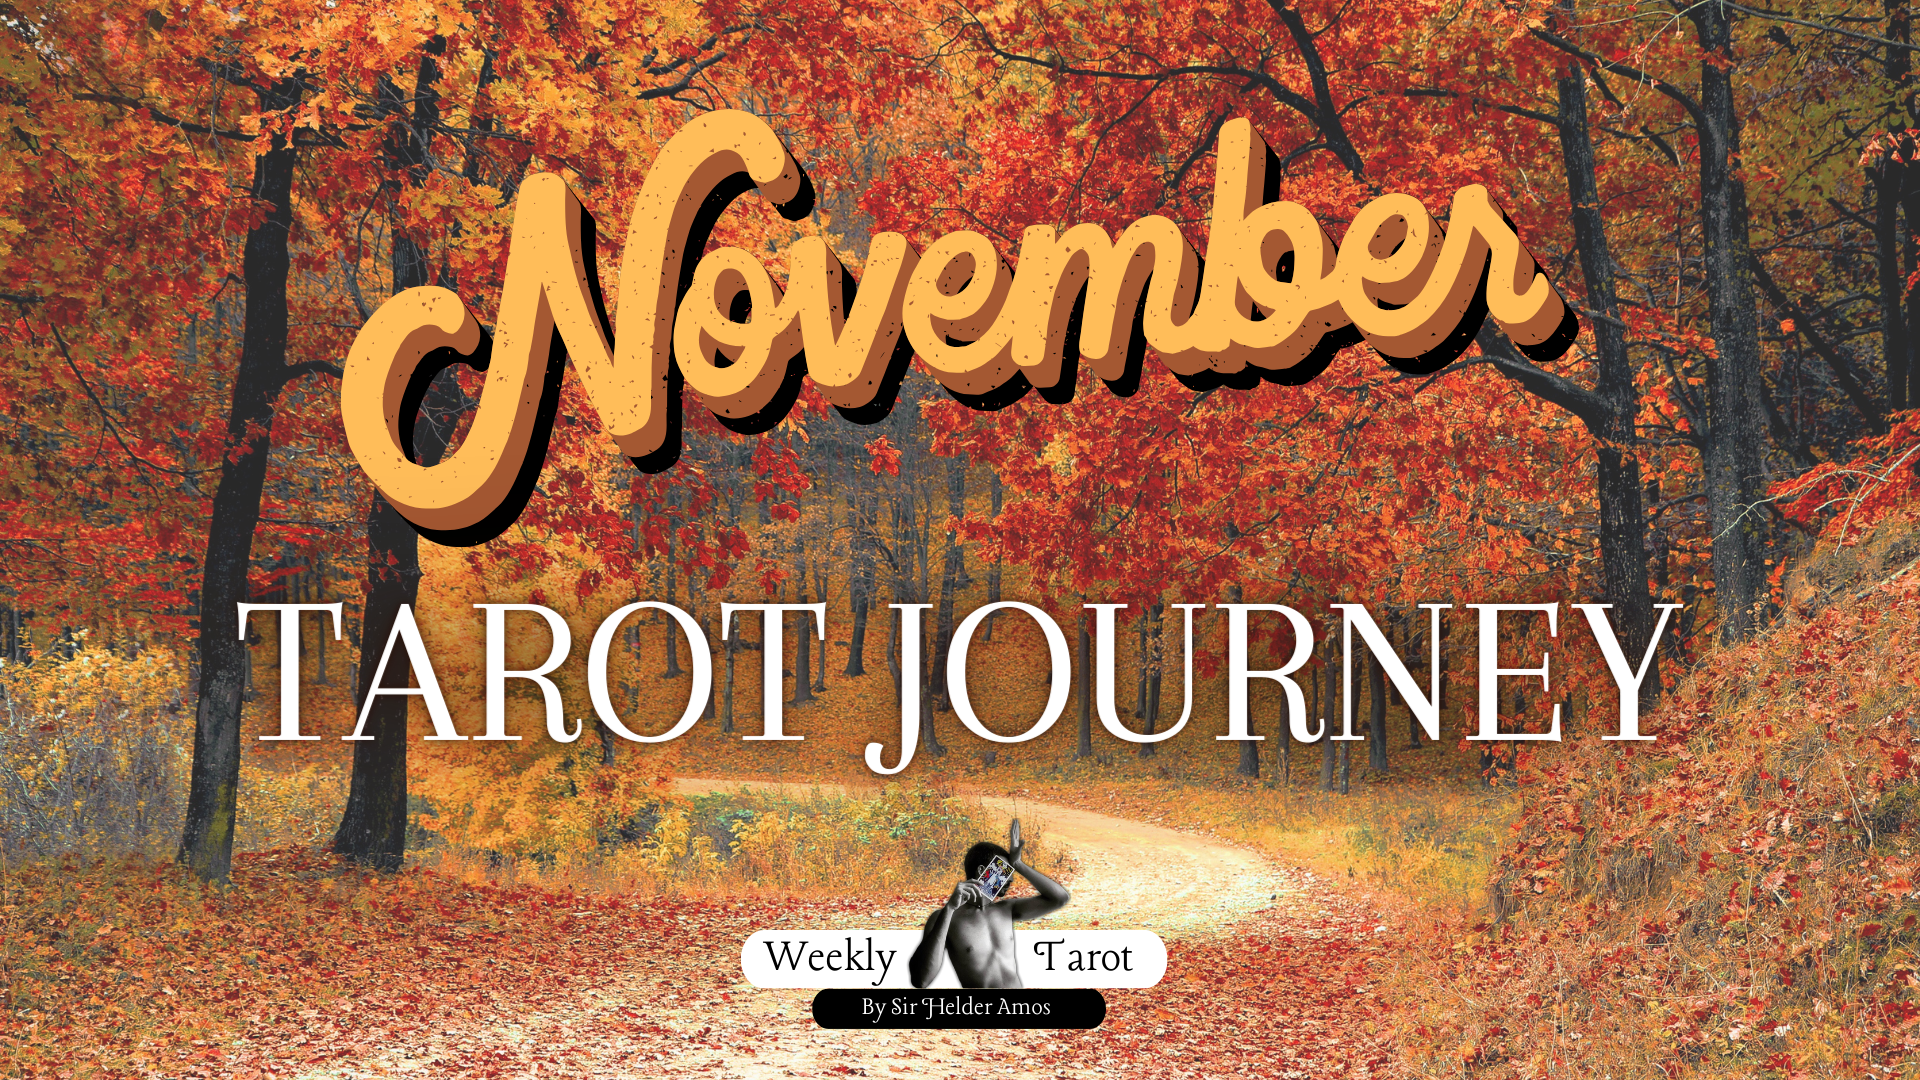 30 questions to ask Tarot during the month of November